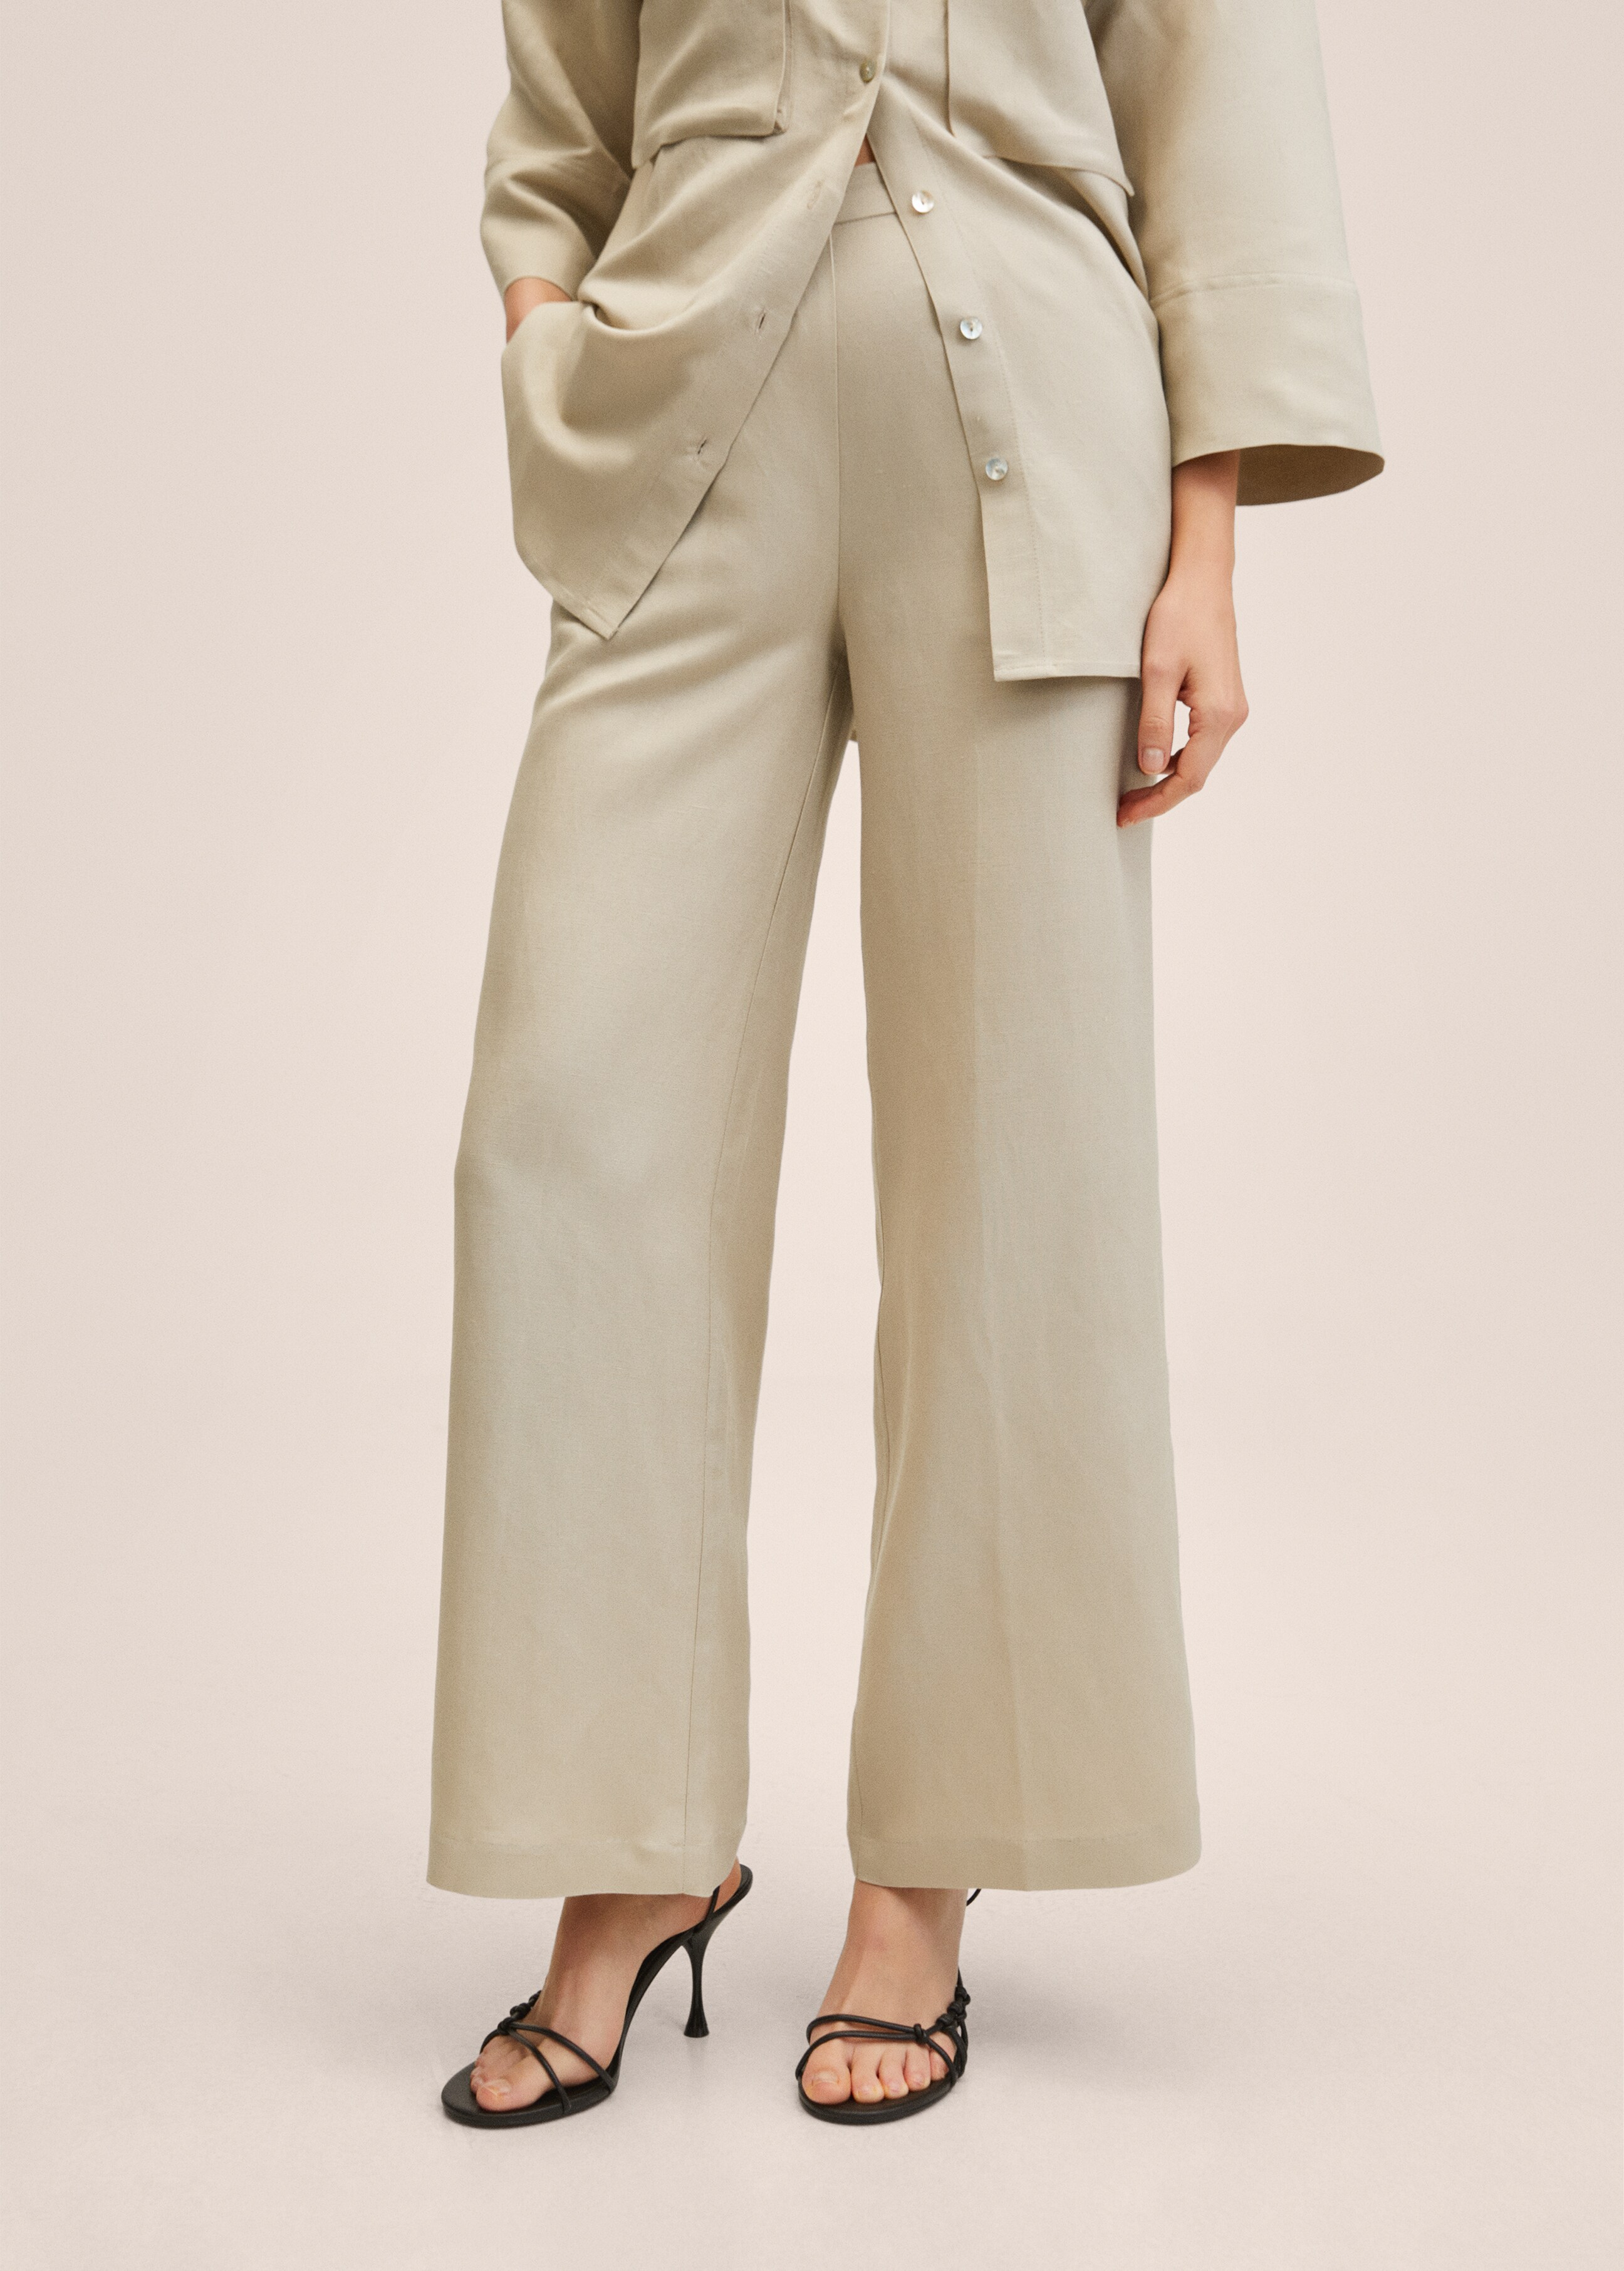 Linen trousers with buttons - Medium plane